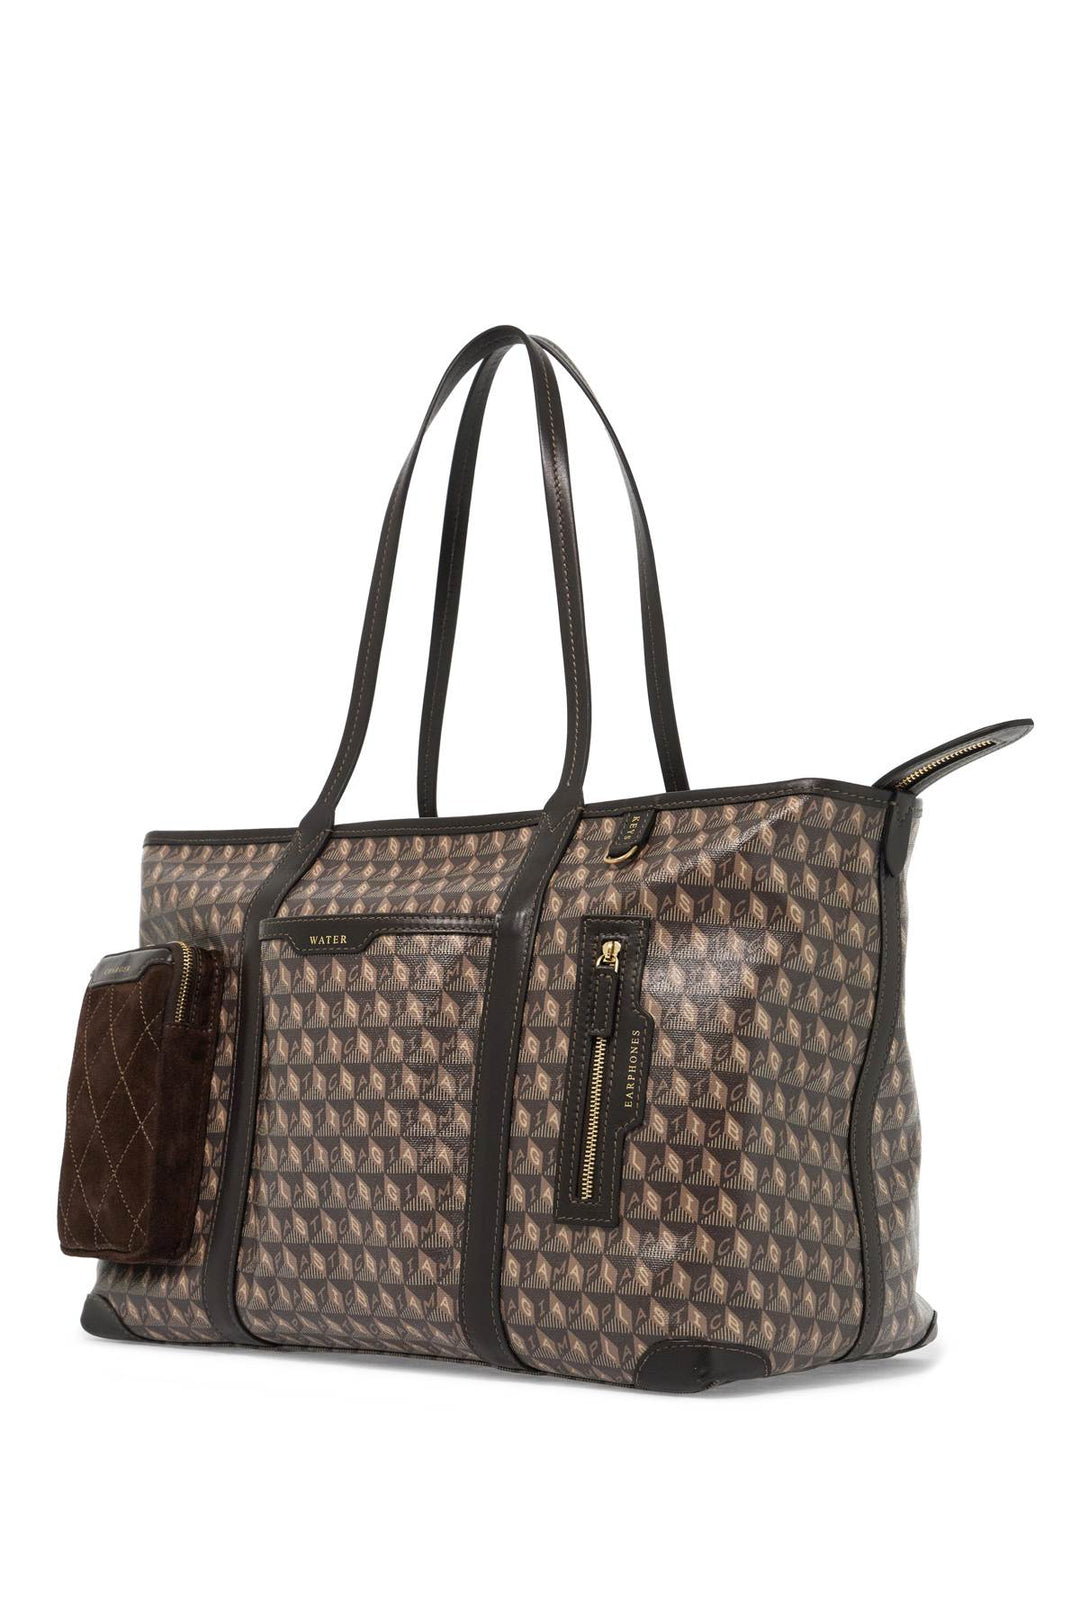 Anya Hindmarch Replace With Double Quotei Am A Plastic Bag In Flight Tote   Brown